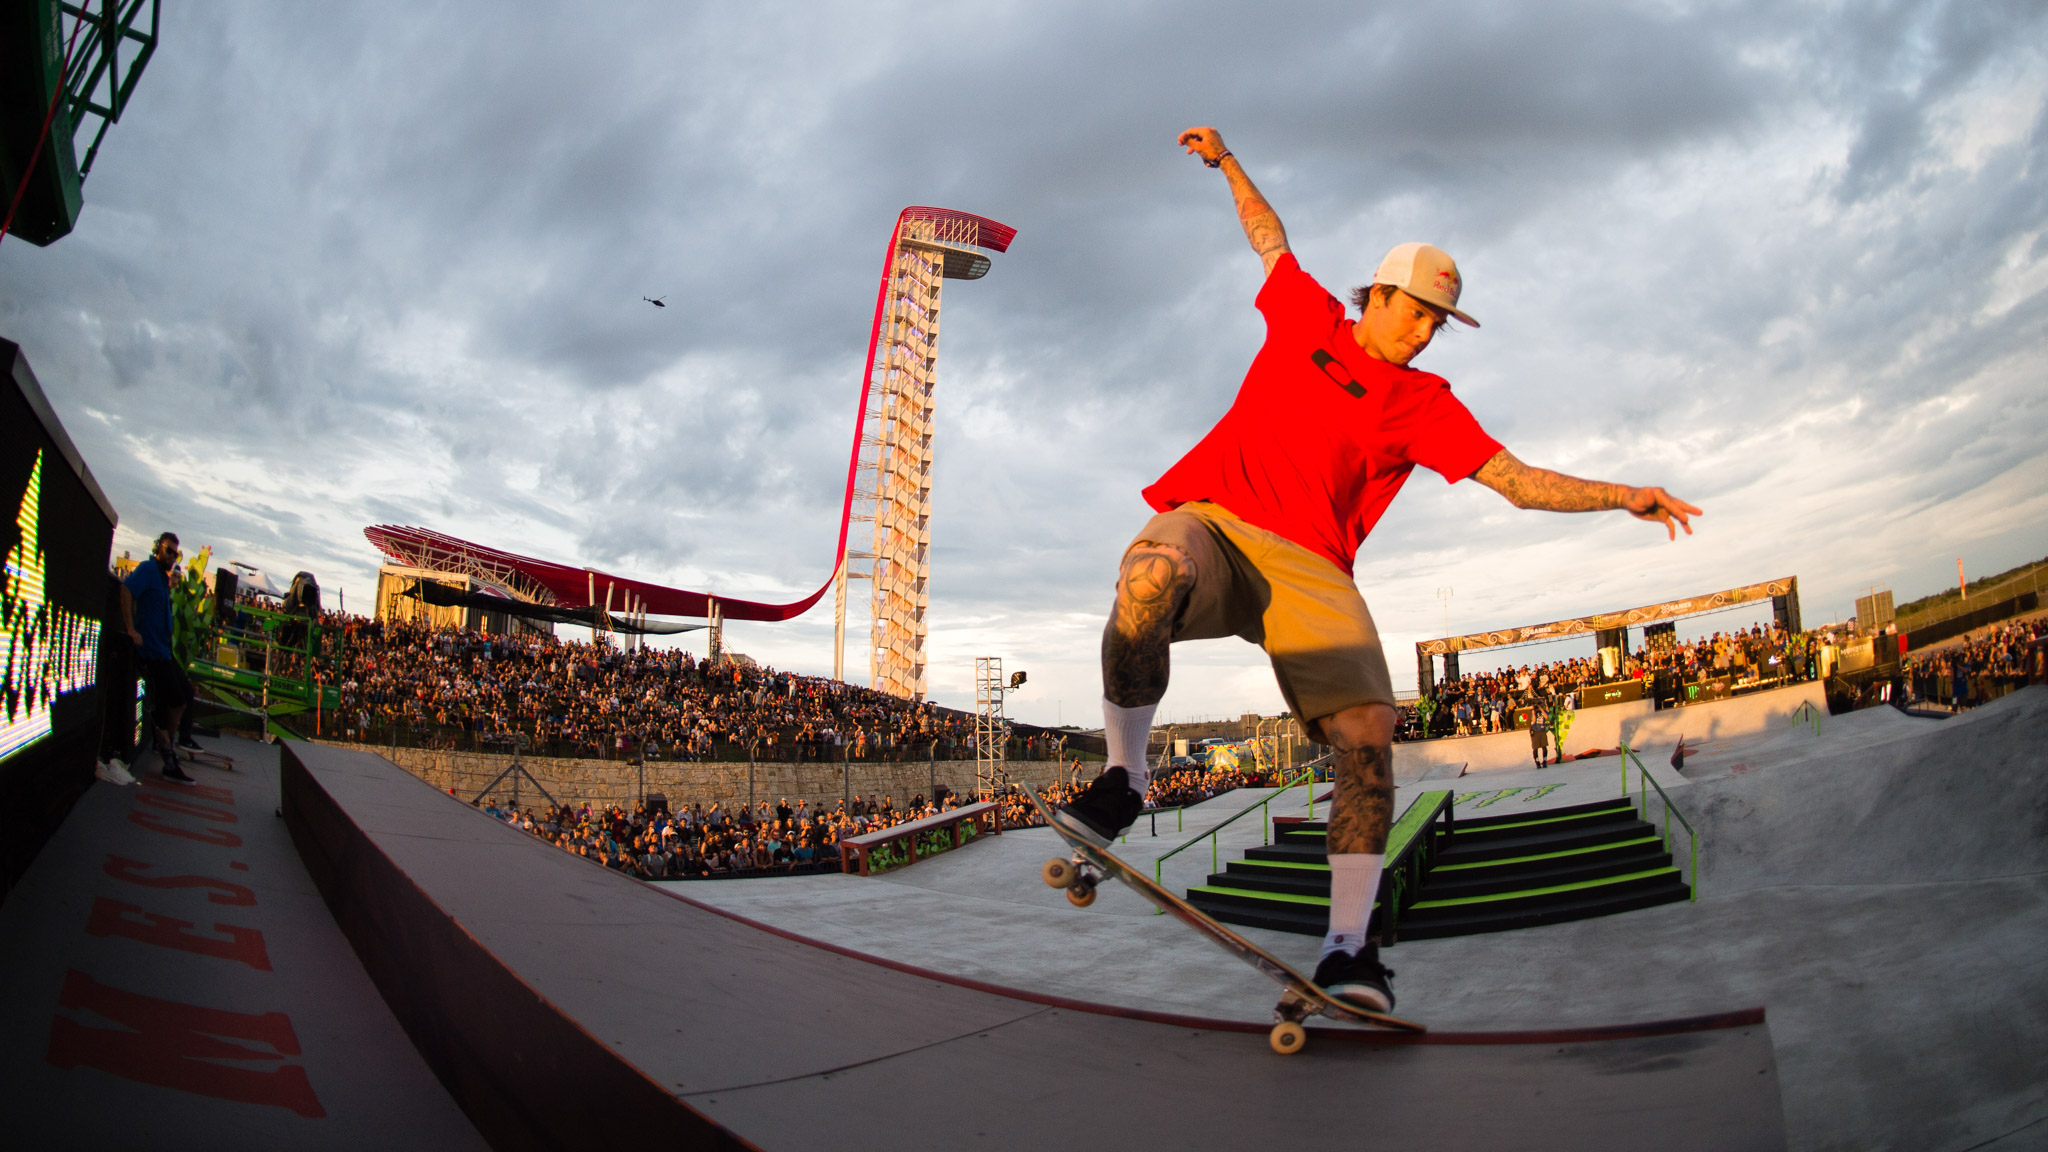 Top X Games Skateboarders Of All Time